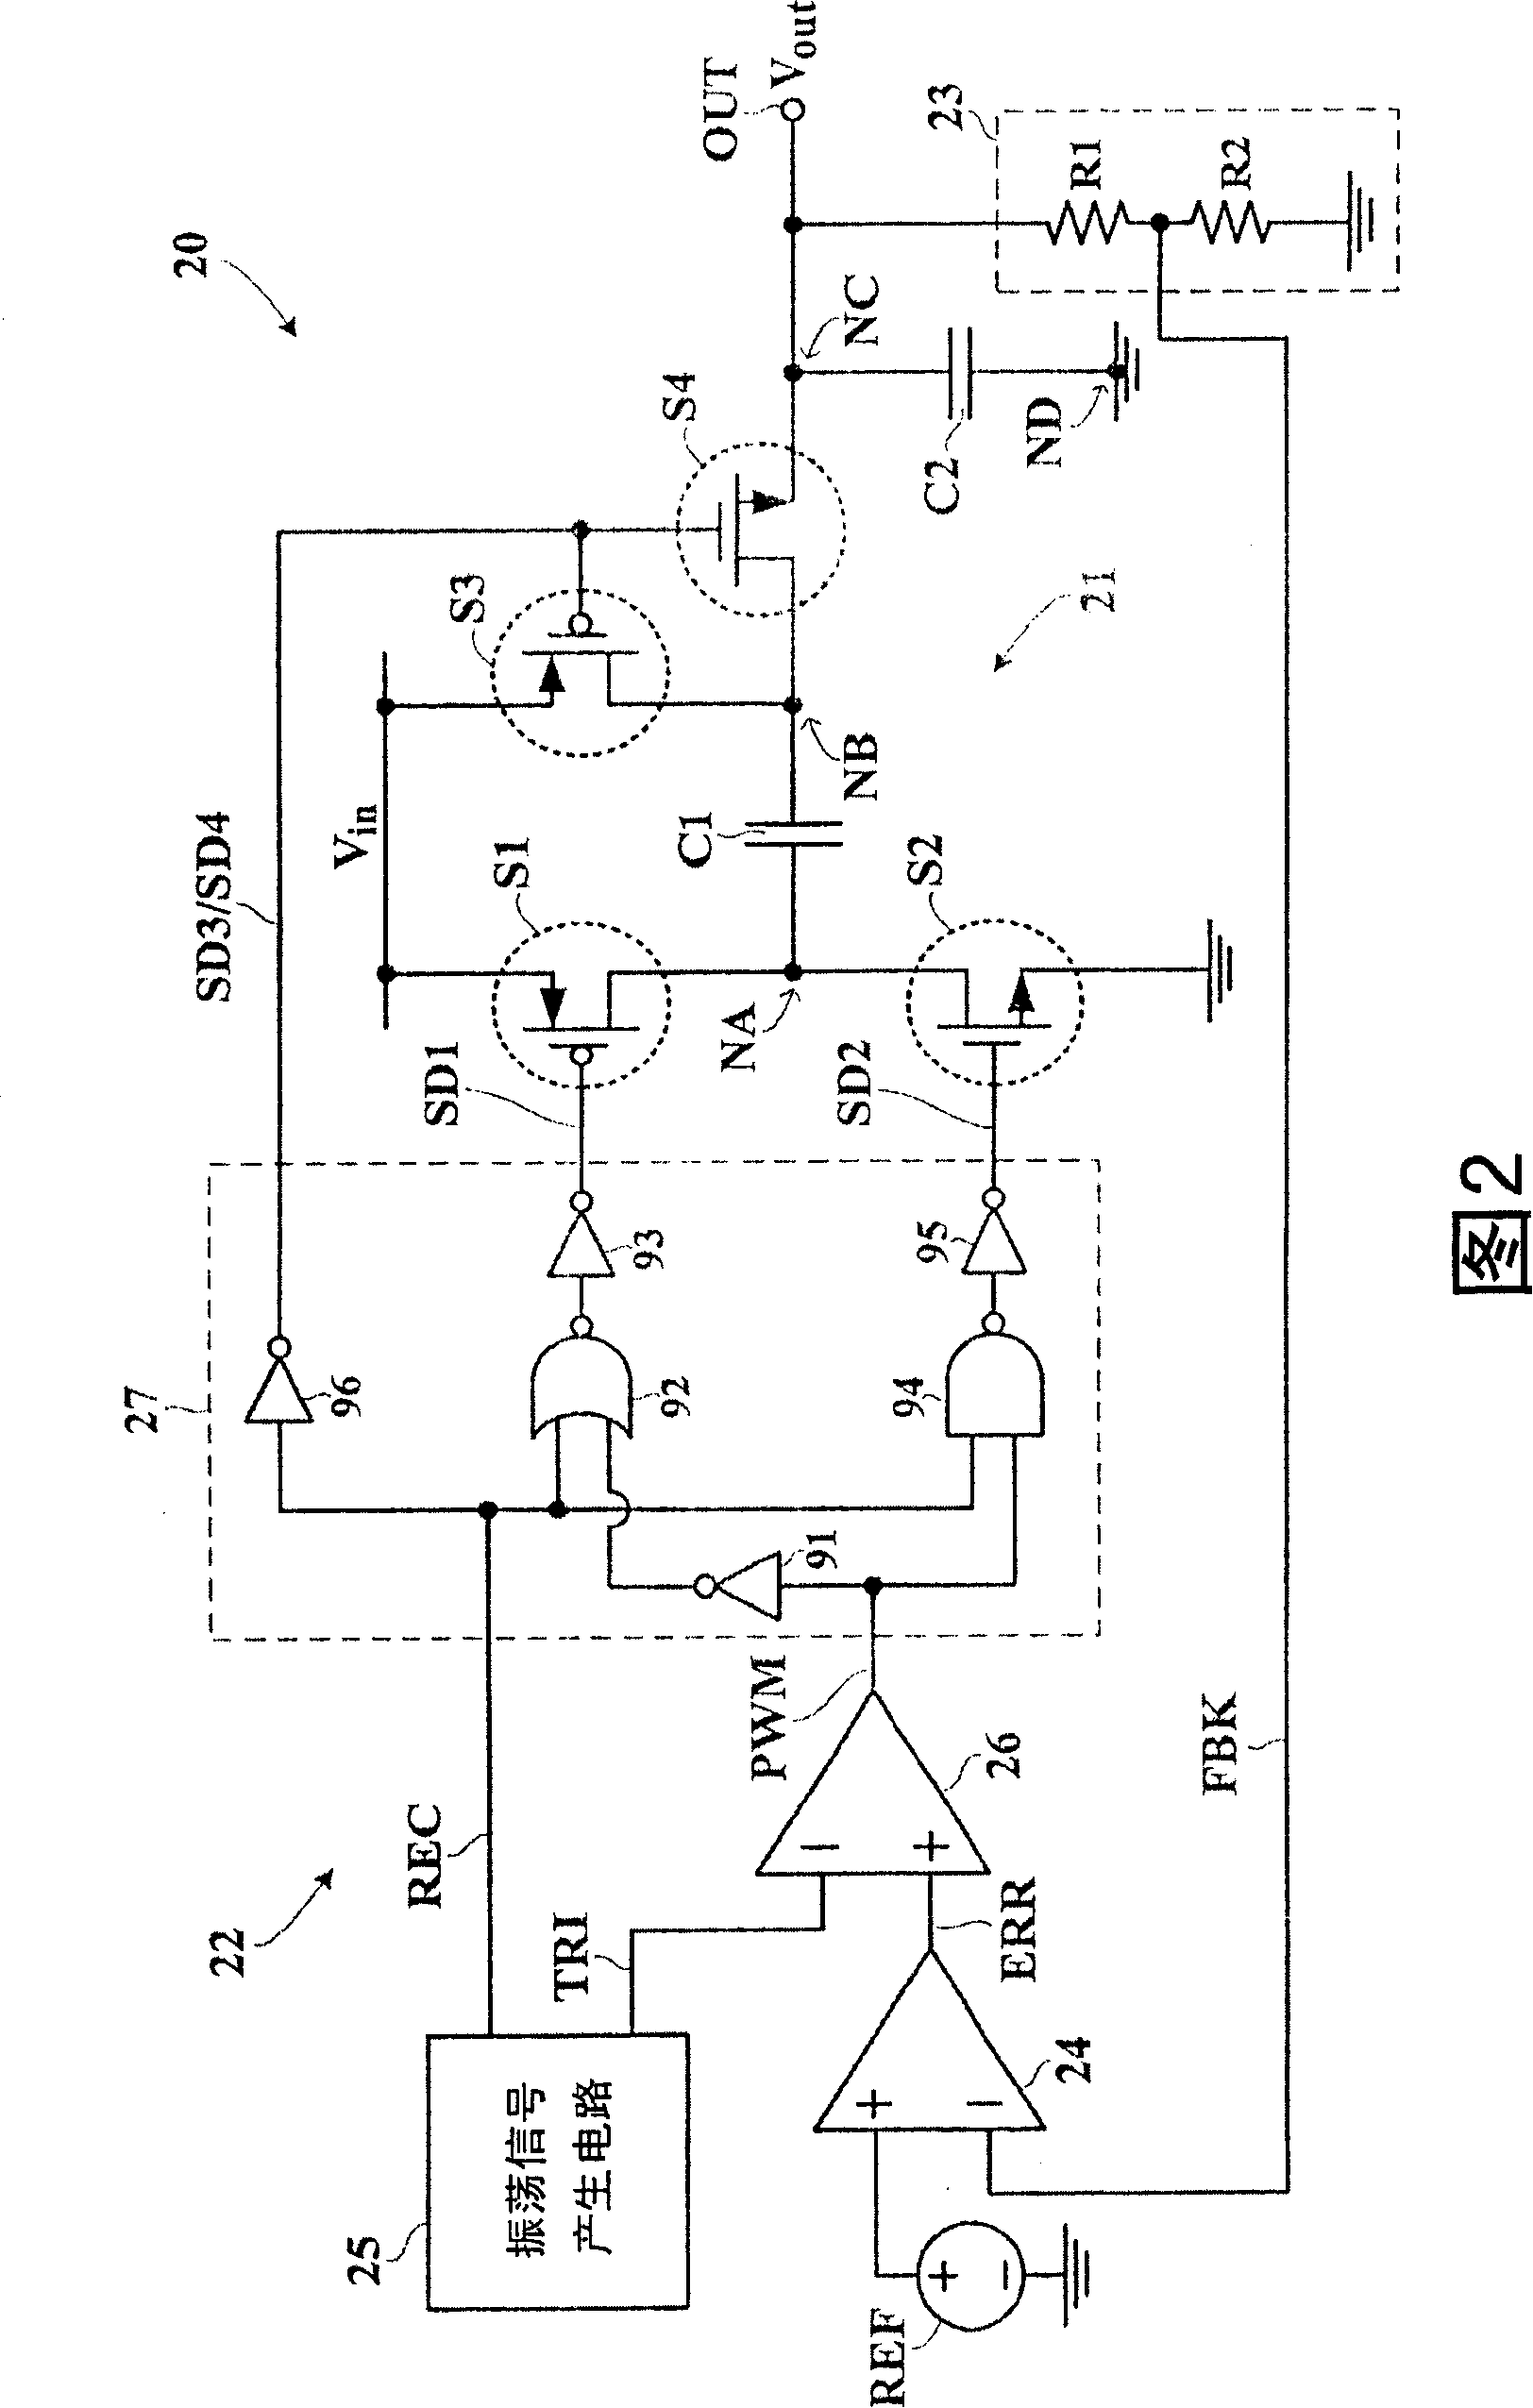 Double-side modulating charge pump circuit and method